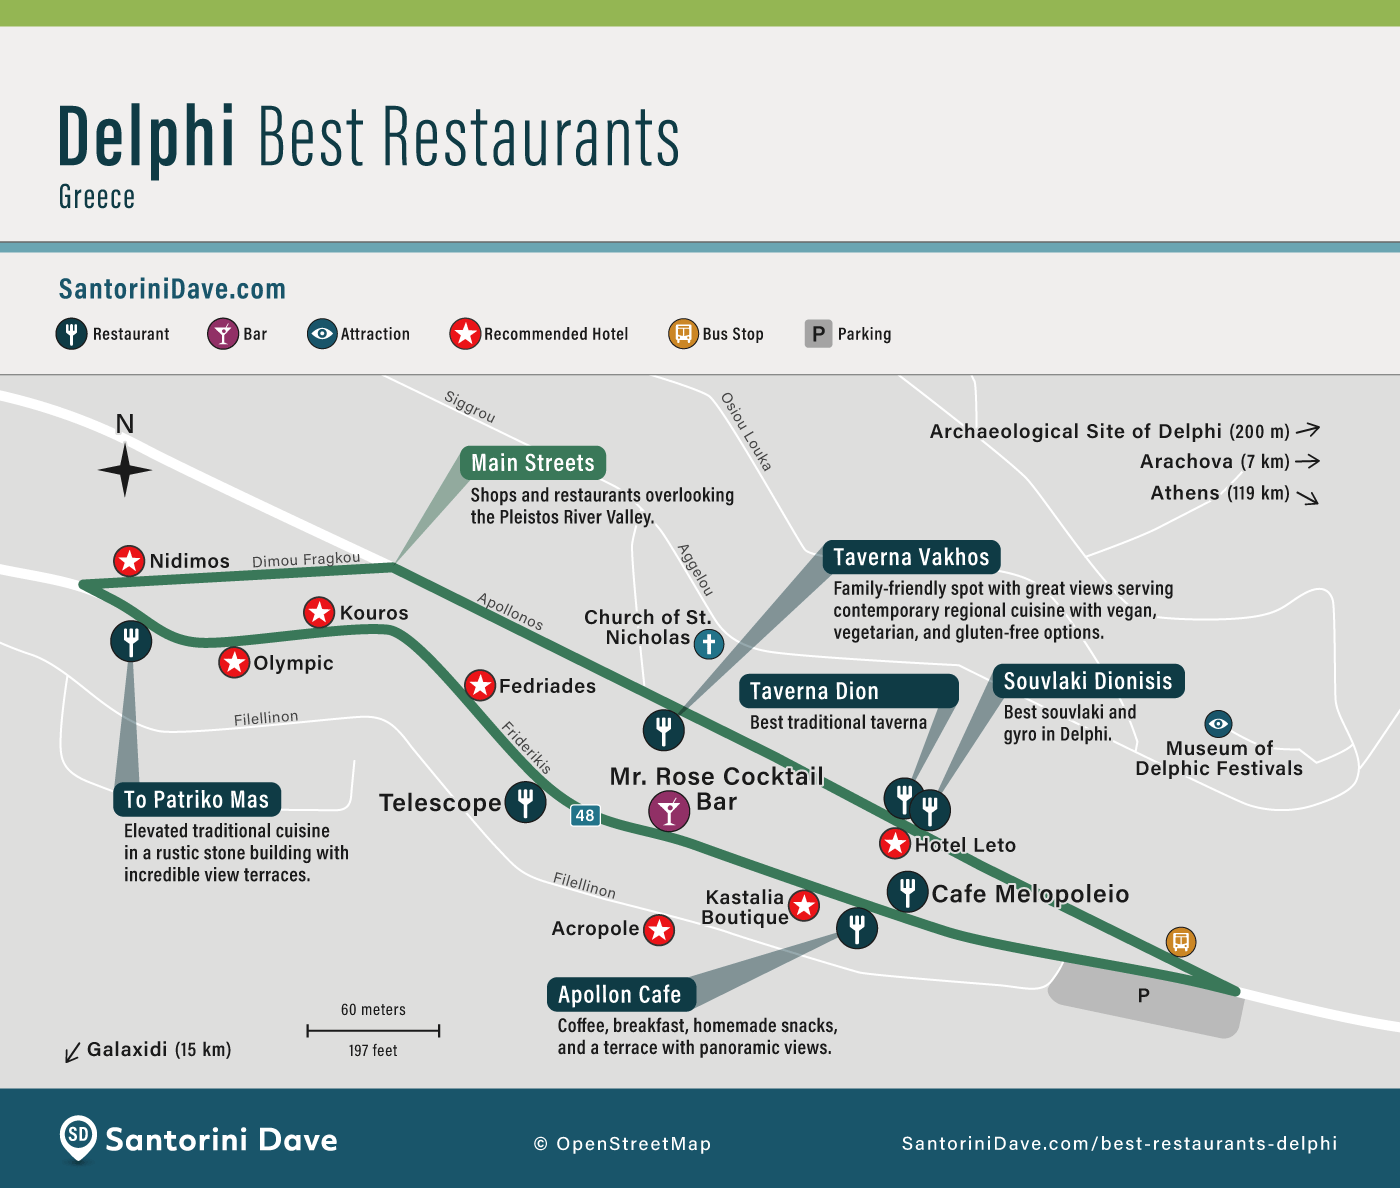 Map showing the location of the top restaurants in Delphi, Greece, along with hotels and attractions.